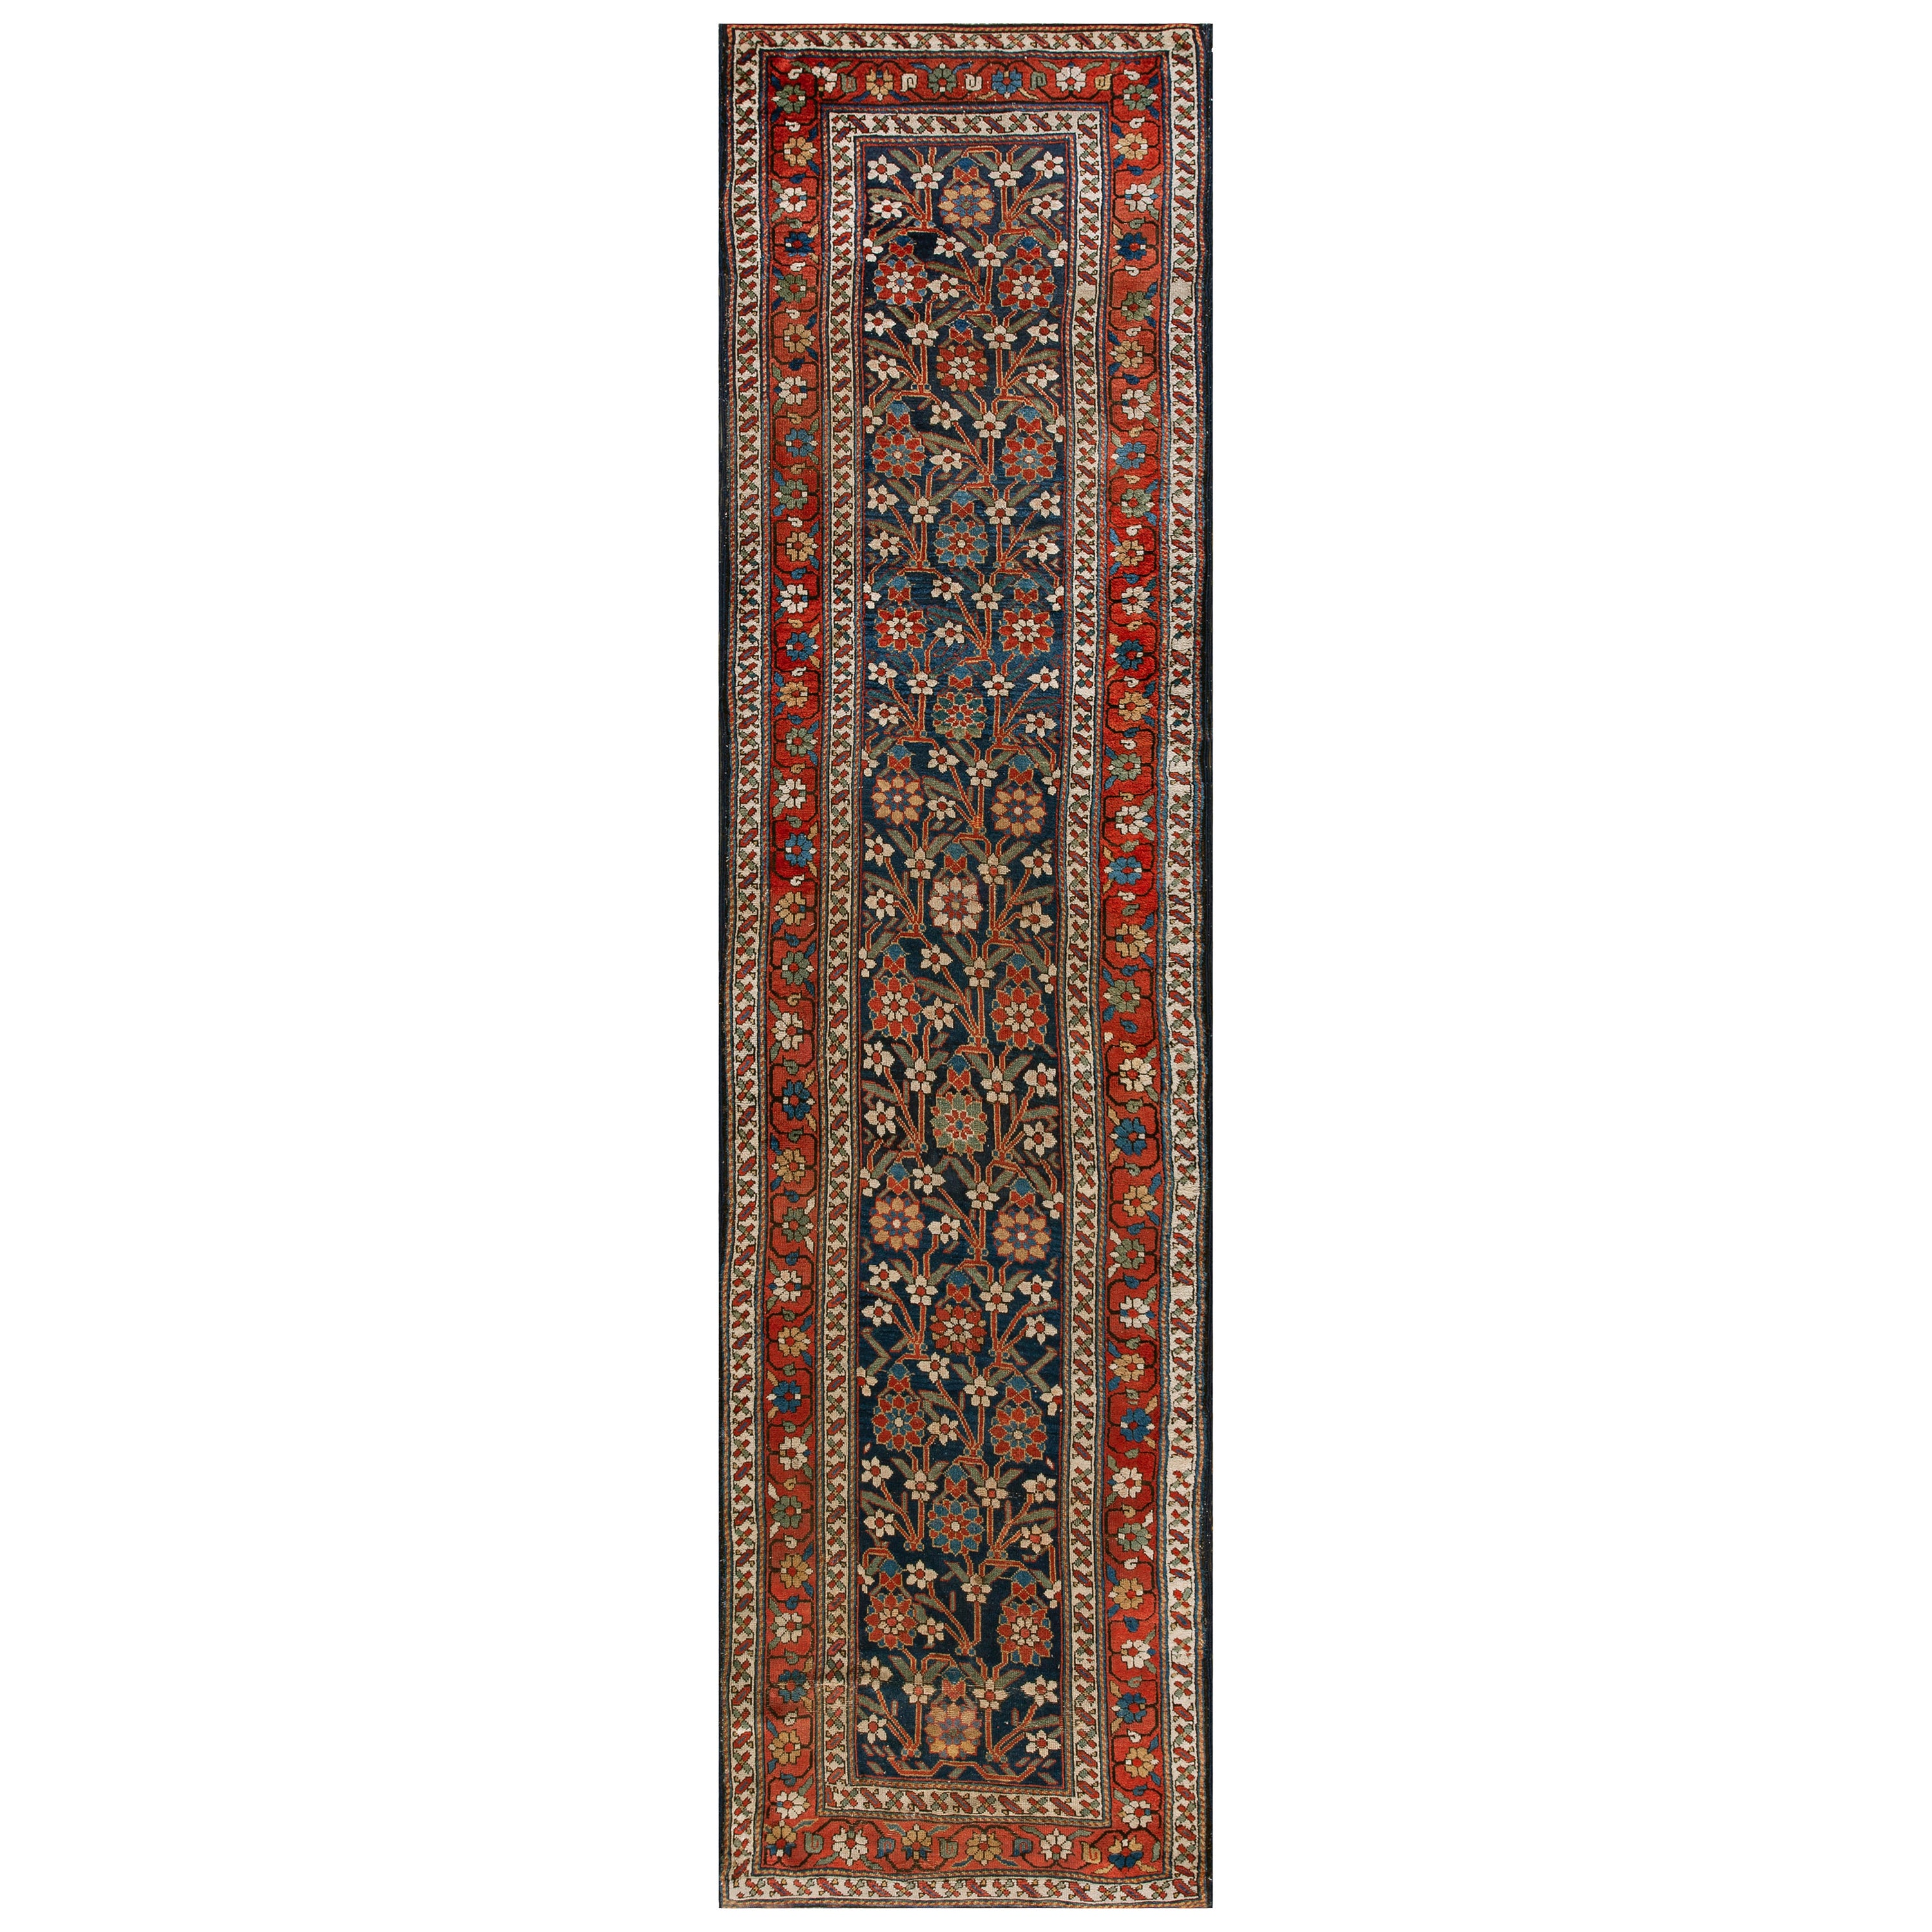 19th Century NW Persian Carpet ( 3' 3'' x 11' 8'' - 99 x 355 cm ) For Sale